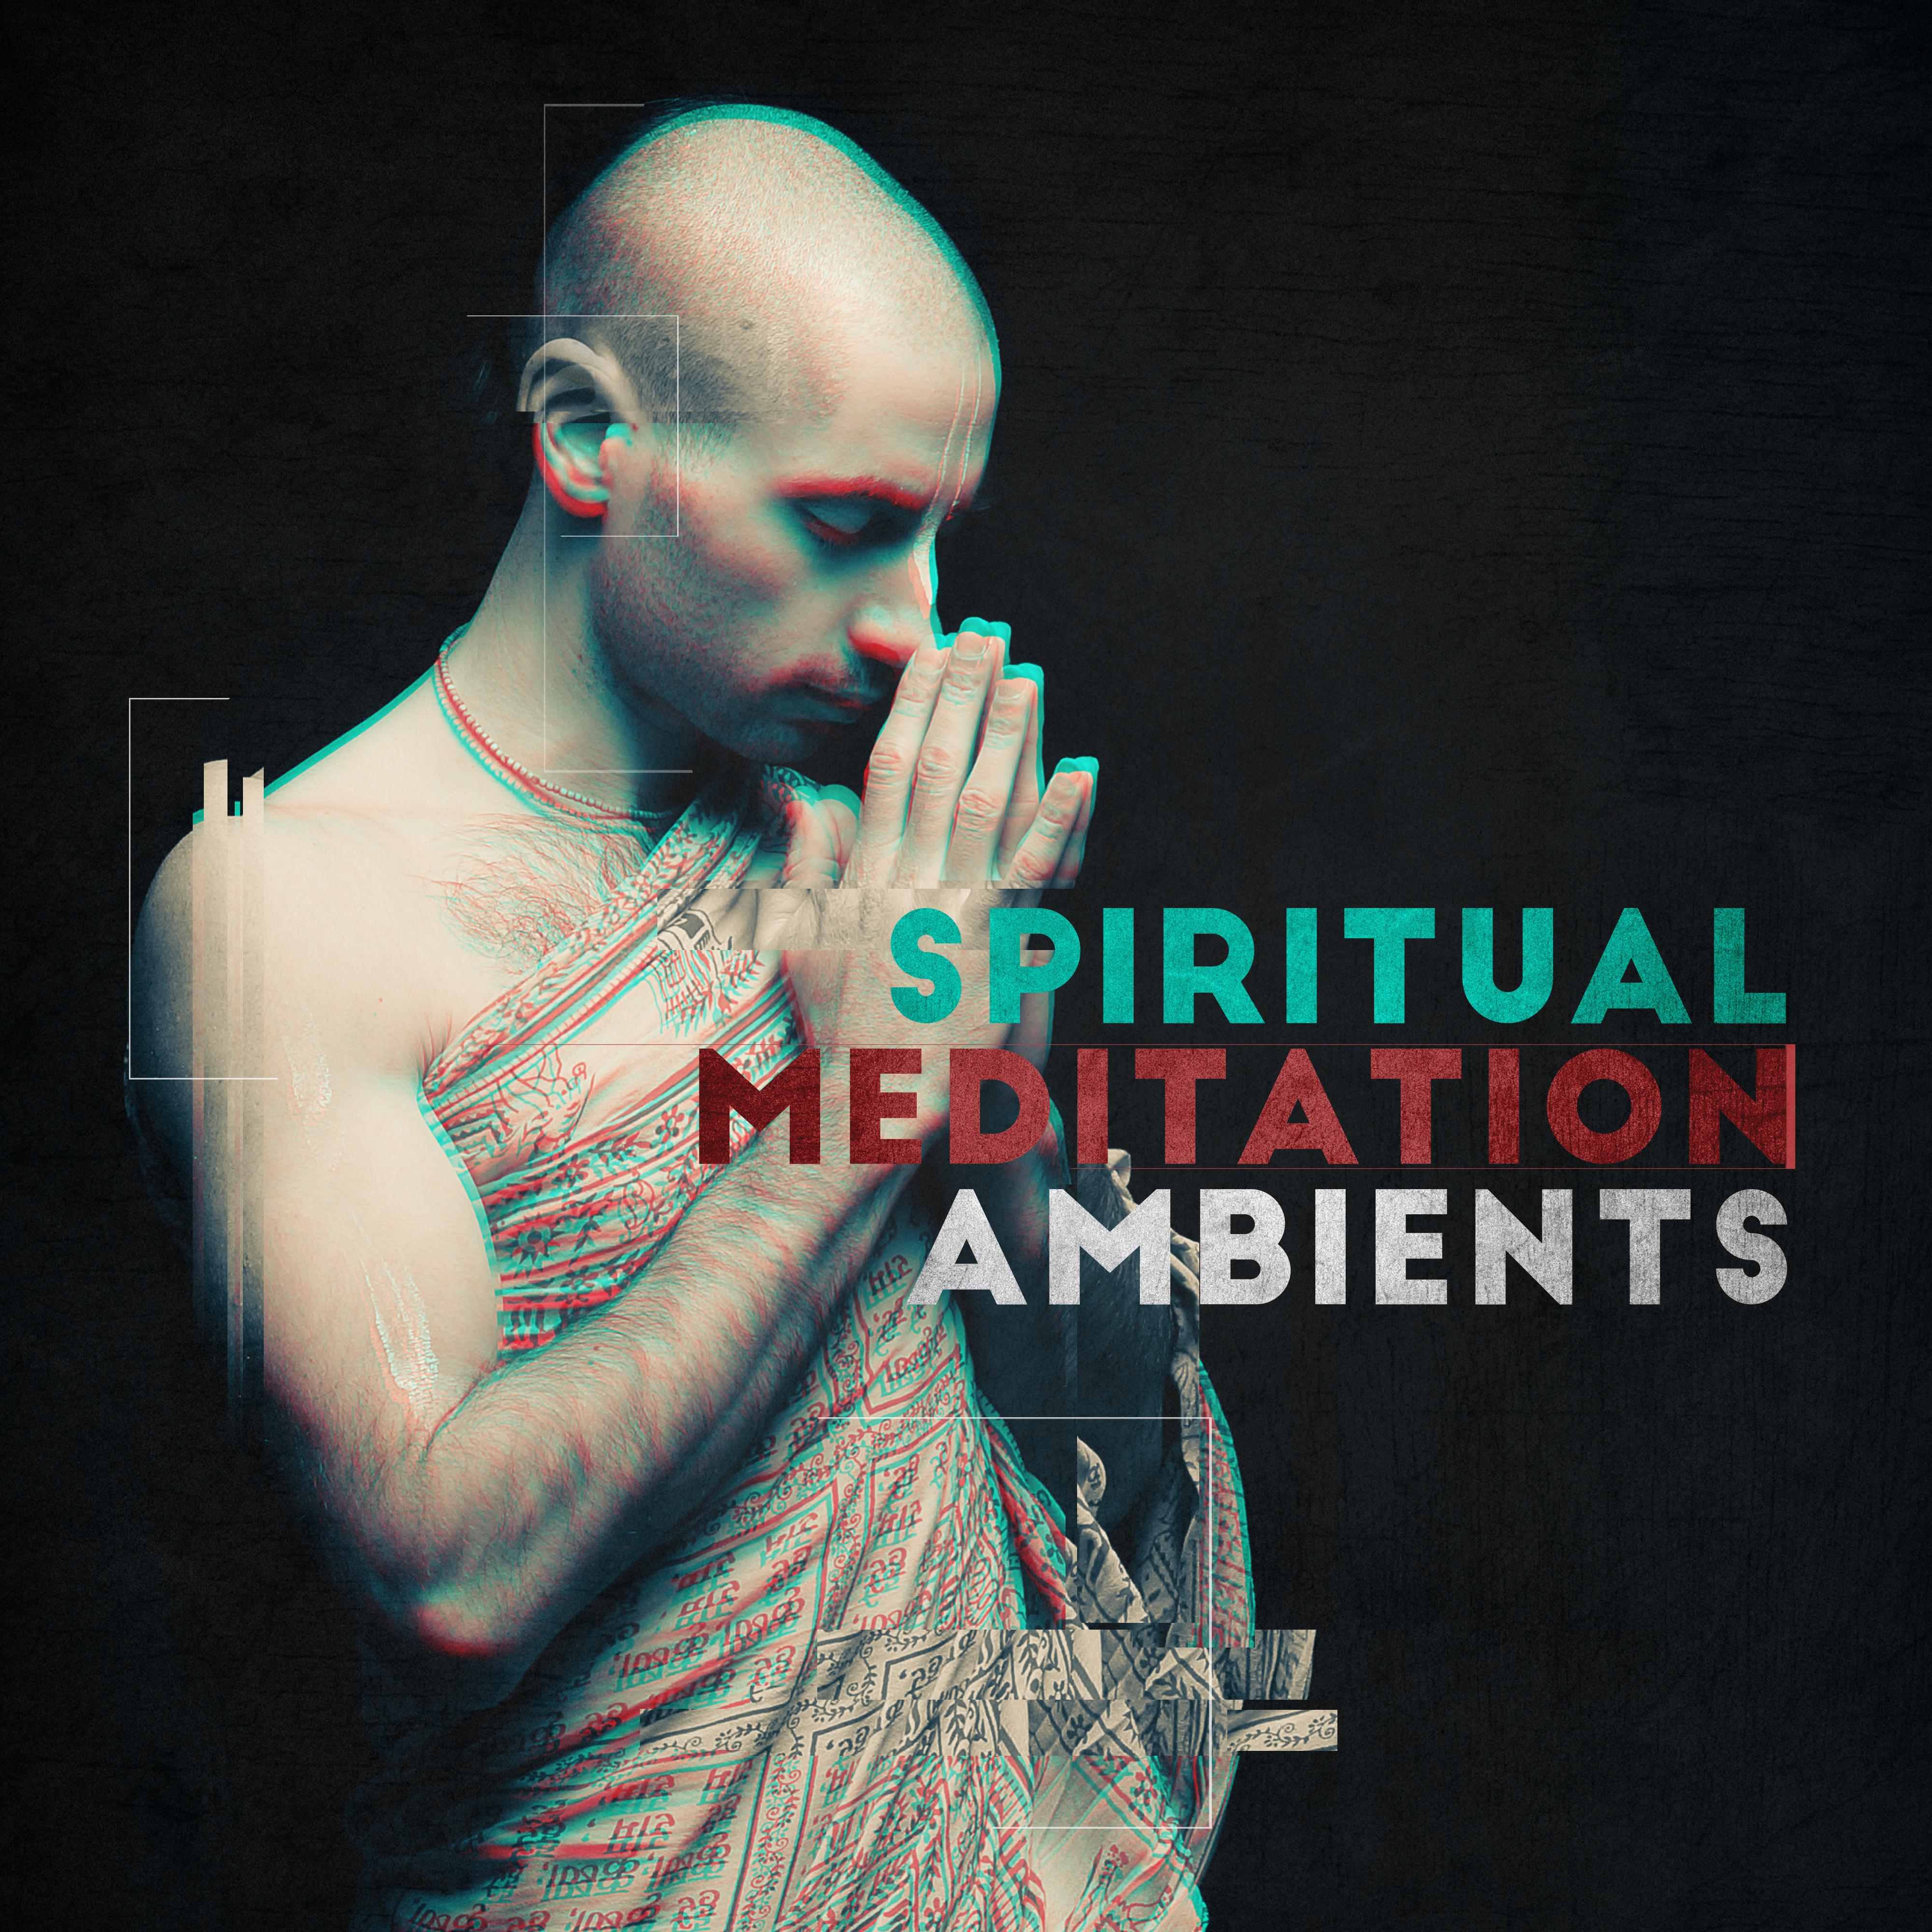 Spiritual Meditation Ambients: New Age 2019 Music for Deep Yoga & Relaxation